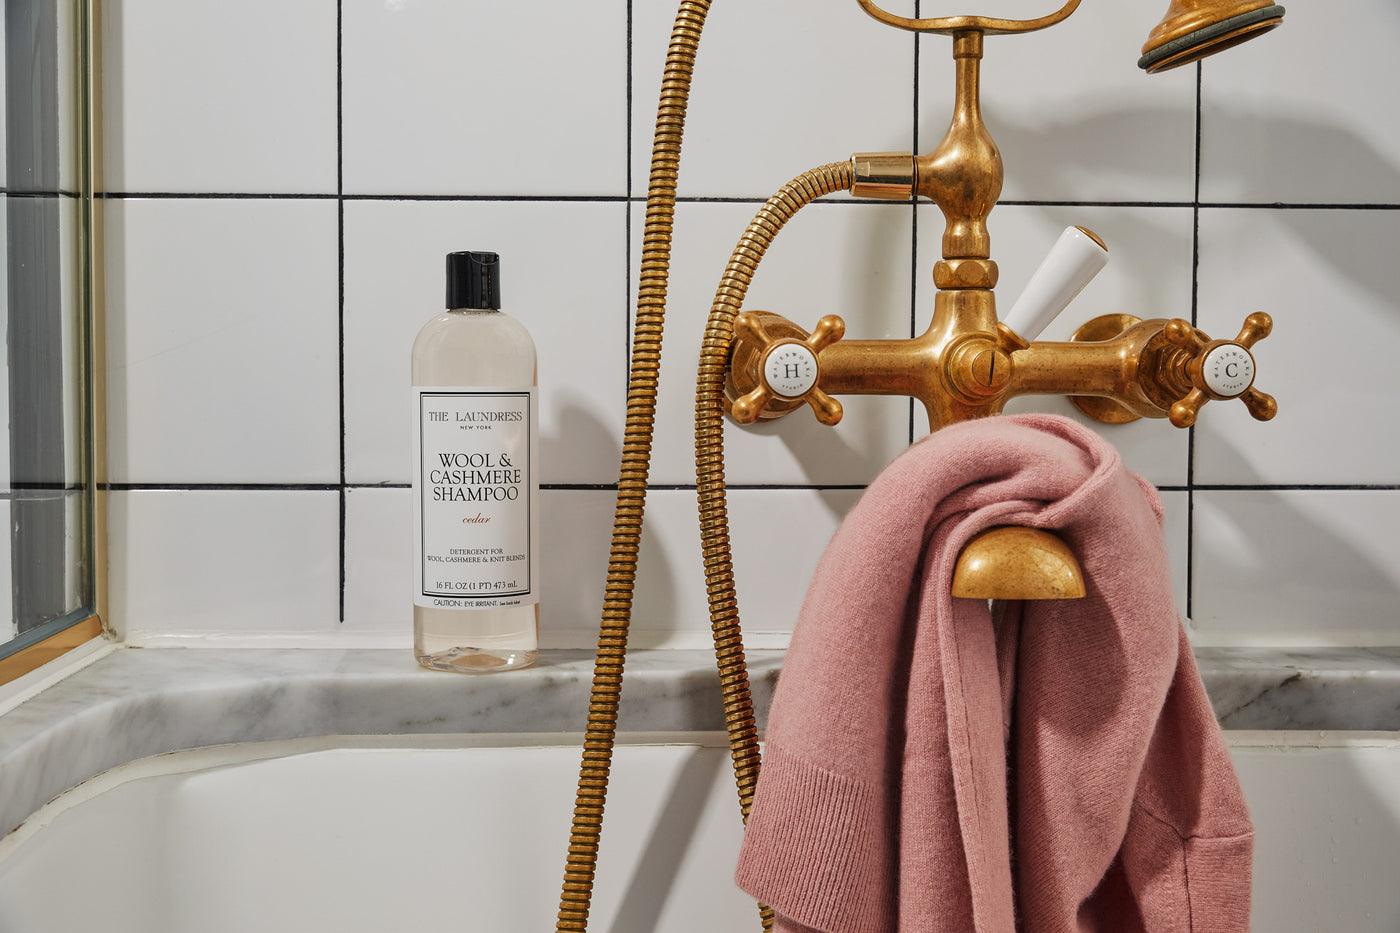 A bottle of The Laundress Wool & Cashmere Shampoo in the scent Cedar balancing on a ledge.